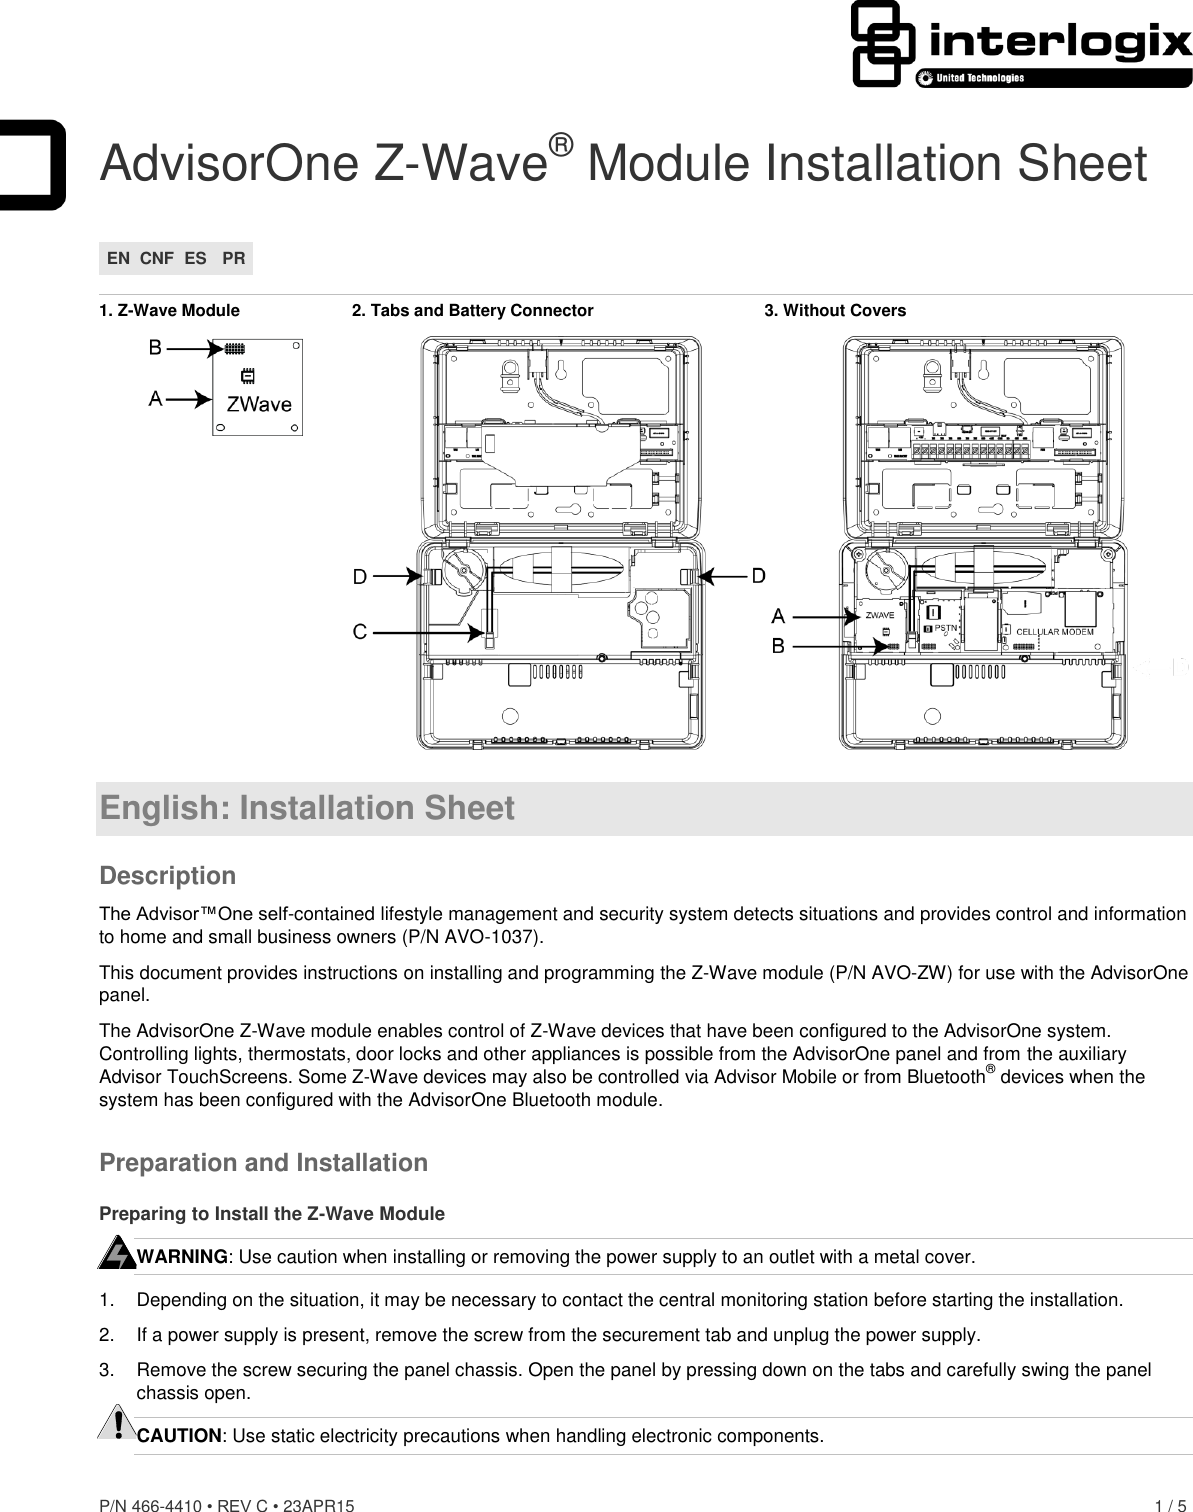 P/N 466-4410 • REV C • 23APR15    1 / 5  AdvisorOne Z-Wave® Module Installation Sheet EN CNF ES PR  1. Z-Wave Module  2. Tabs and Battery Connector  3. Without Covers   English: Installation Sheet Description The Advisor™One self-contained lifestyle management and security system detects situations and provides control and information to home and small business owners (P/N AVO-1037). This document provides instructions on installing and programming the Z-Wave module (P/N AVO-ZW) for use with the AdvisorOne panel. The AdvisorOne Z-Wave module enables control of Z-Wave devices that have been configured to the AdvisorOne system. Controlling lights, thermostats, door locks and other appliances is possible from the AdvisorOne panel and from the auxiliary Advisor TouchScreens. Some Z-Wave devices may also be controlled via Advisor Mobile or from Bluetooth® devices when the system has been configured with the AdvisorOne Bluetooth module. Preparation and Installation Preparing to Install the Z-Wave Module WARNING: Use caution when installing or removing the power supply to an outlet with a metal cover. 1.  Depending on the situation, it may be necessary to contact the central monitoring station before starting the installation. 2.  If a power supply is present, remove the screw from the securement tab and unplug the power supply. 3.  Remove the screw securing the panel chassis. Open the panel by pressing down on the tabs and carefully swing the panel chassis open. CAUTION: Use static electricity precautions when handling electronic components.   